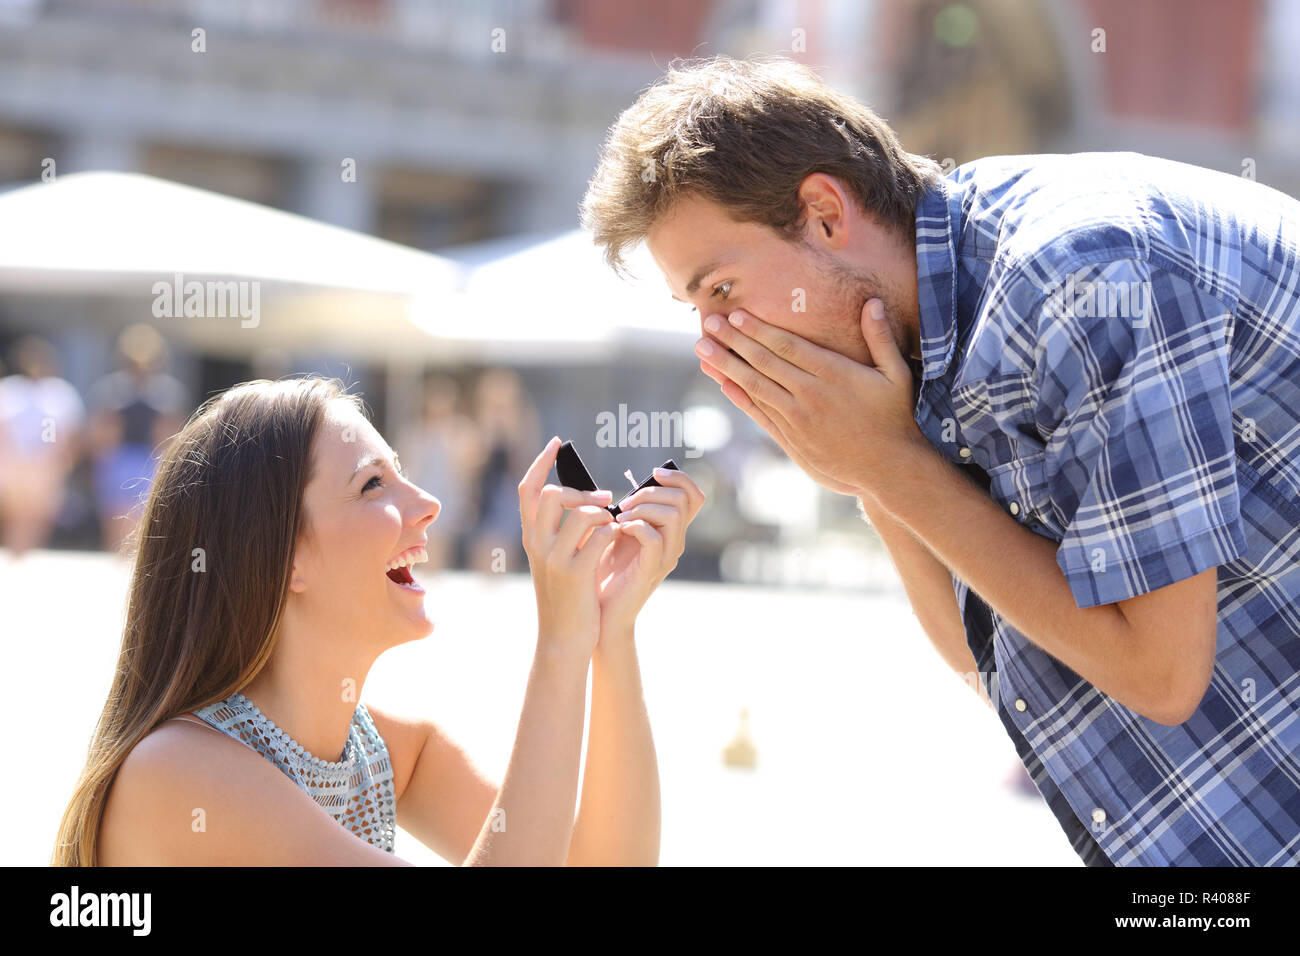 Proposal of a woman asking marry to a man Stock Photo - Alamy